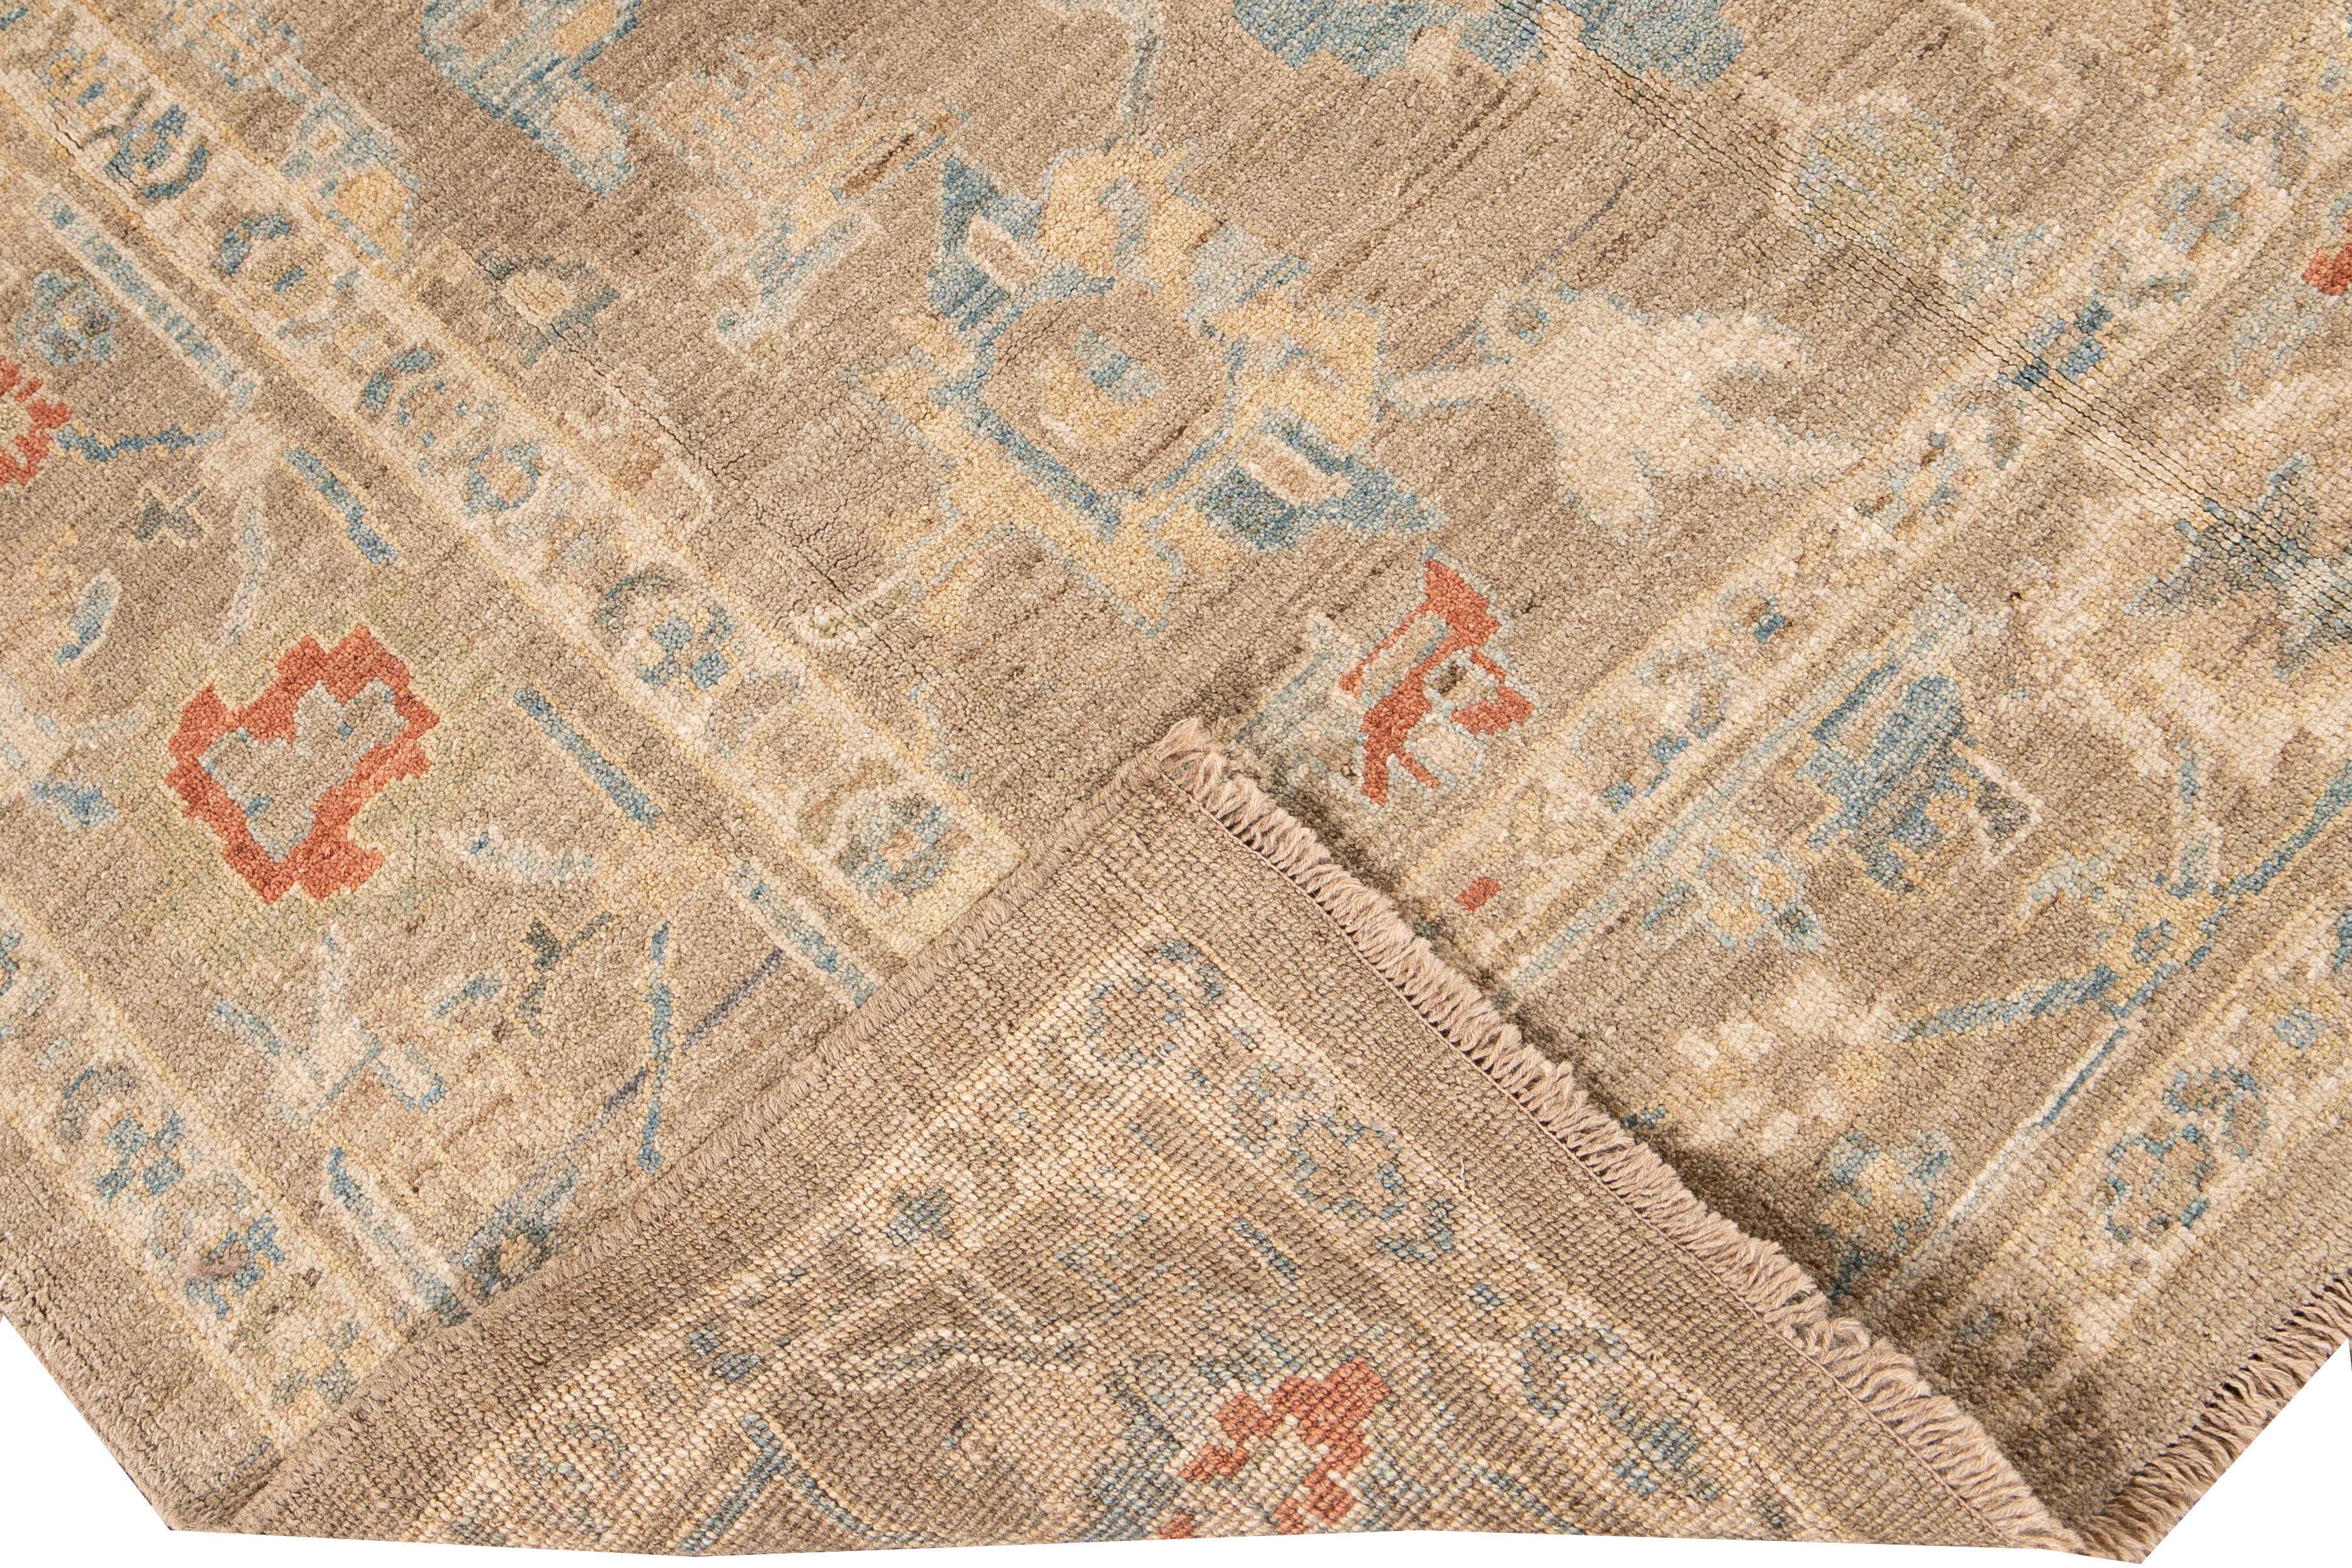 Beautiful modern Sultanabad hand-knotted wool rug with a nude field. This Sultanabad rug has Ivory, yellow, blue, green, and orange accents in a gorgeous all-over geometric floral design.

This rug measures: 6'2